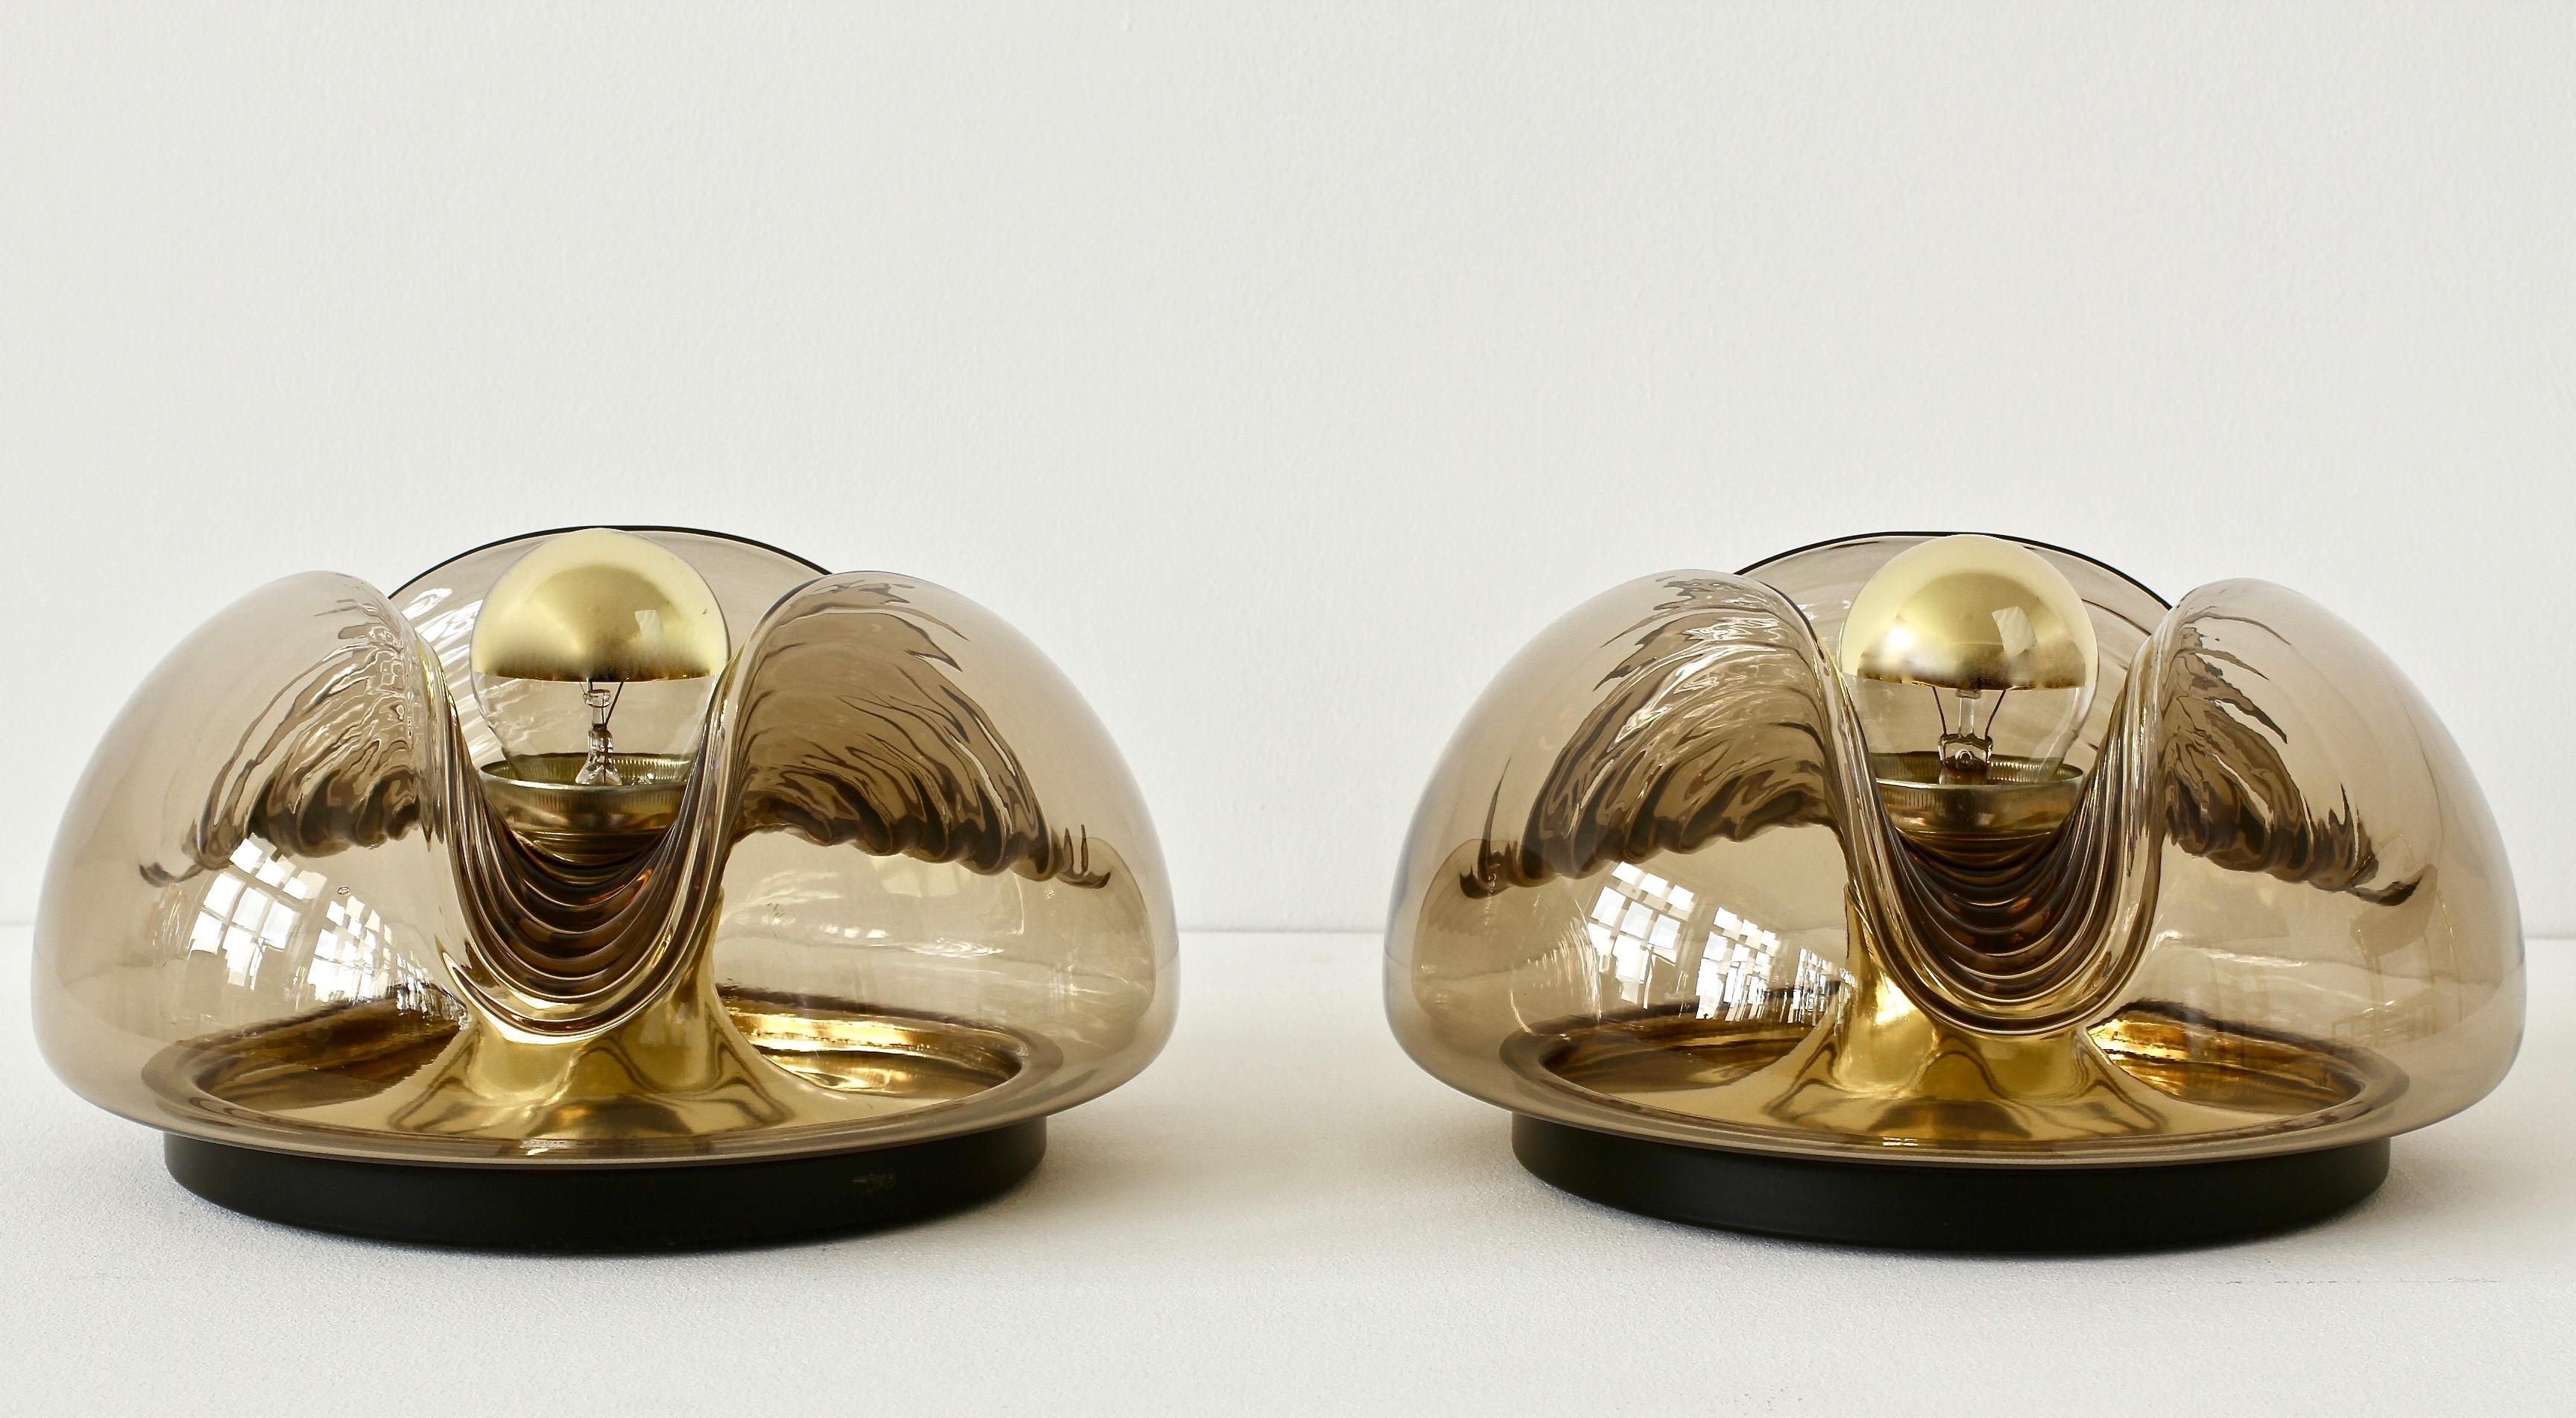 Peill and Putzler pair of midcentury flush mount wall lights or sconces whose design is attributed to Koch & Lowy in the 1970s. This range was called 